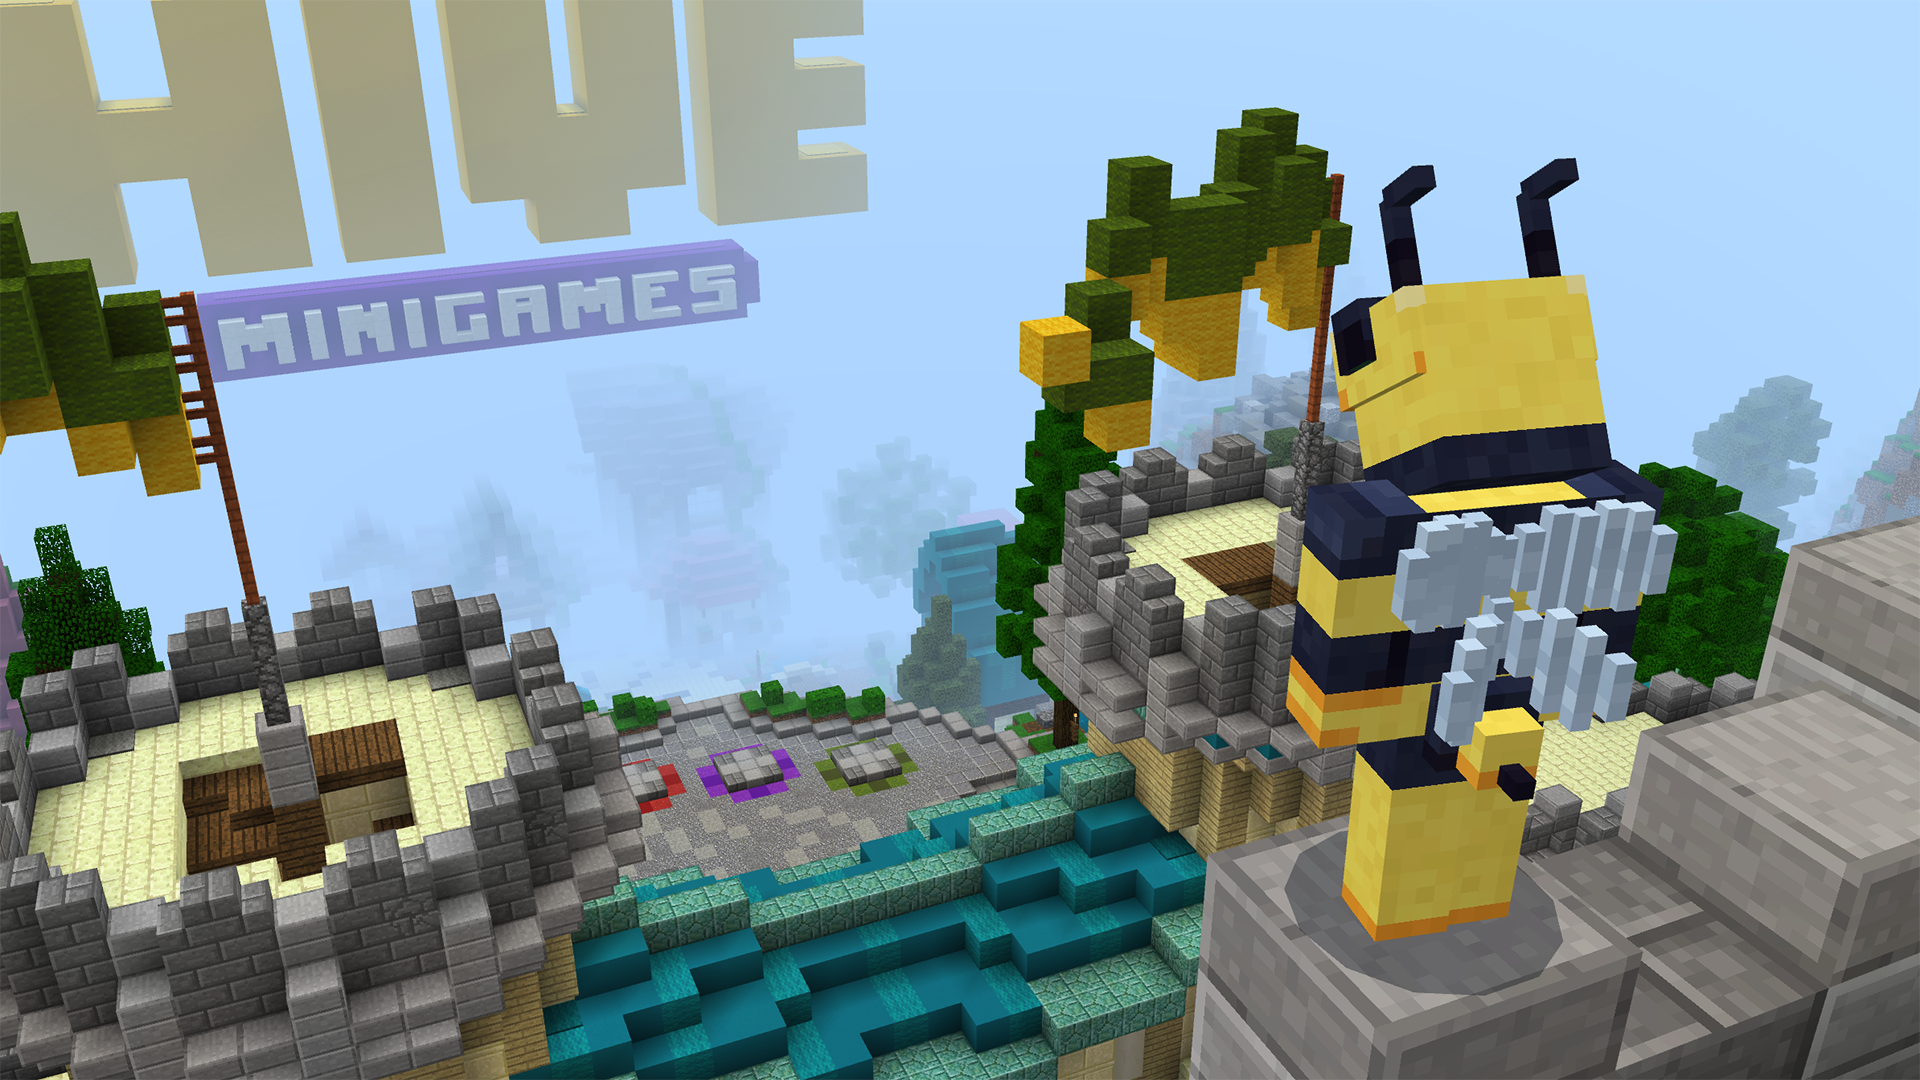 Game Releases - The Hive - Minecraft Server